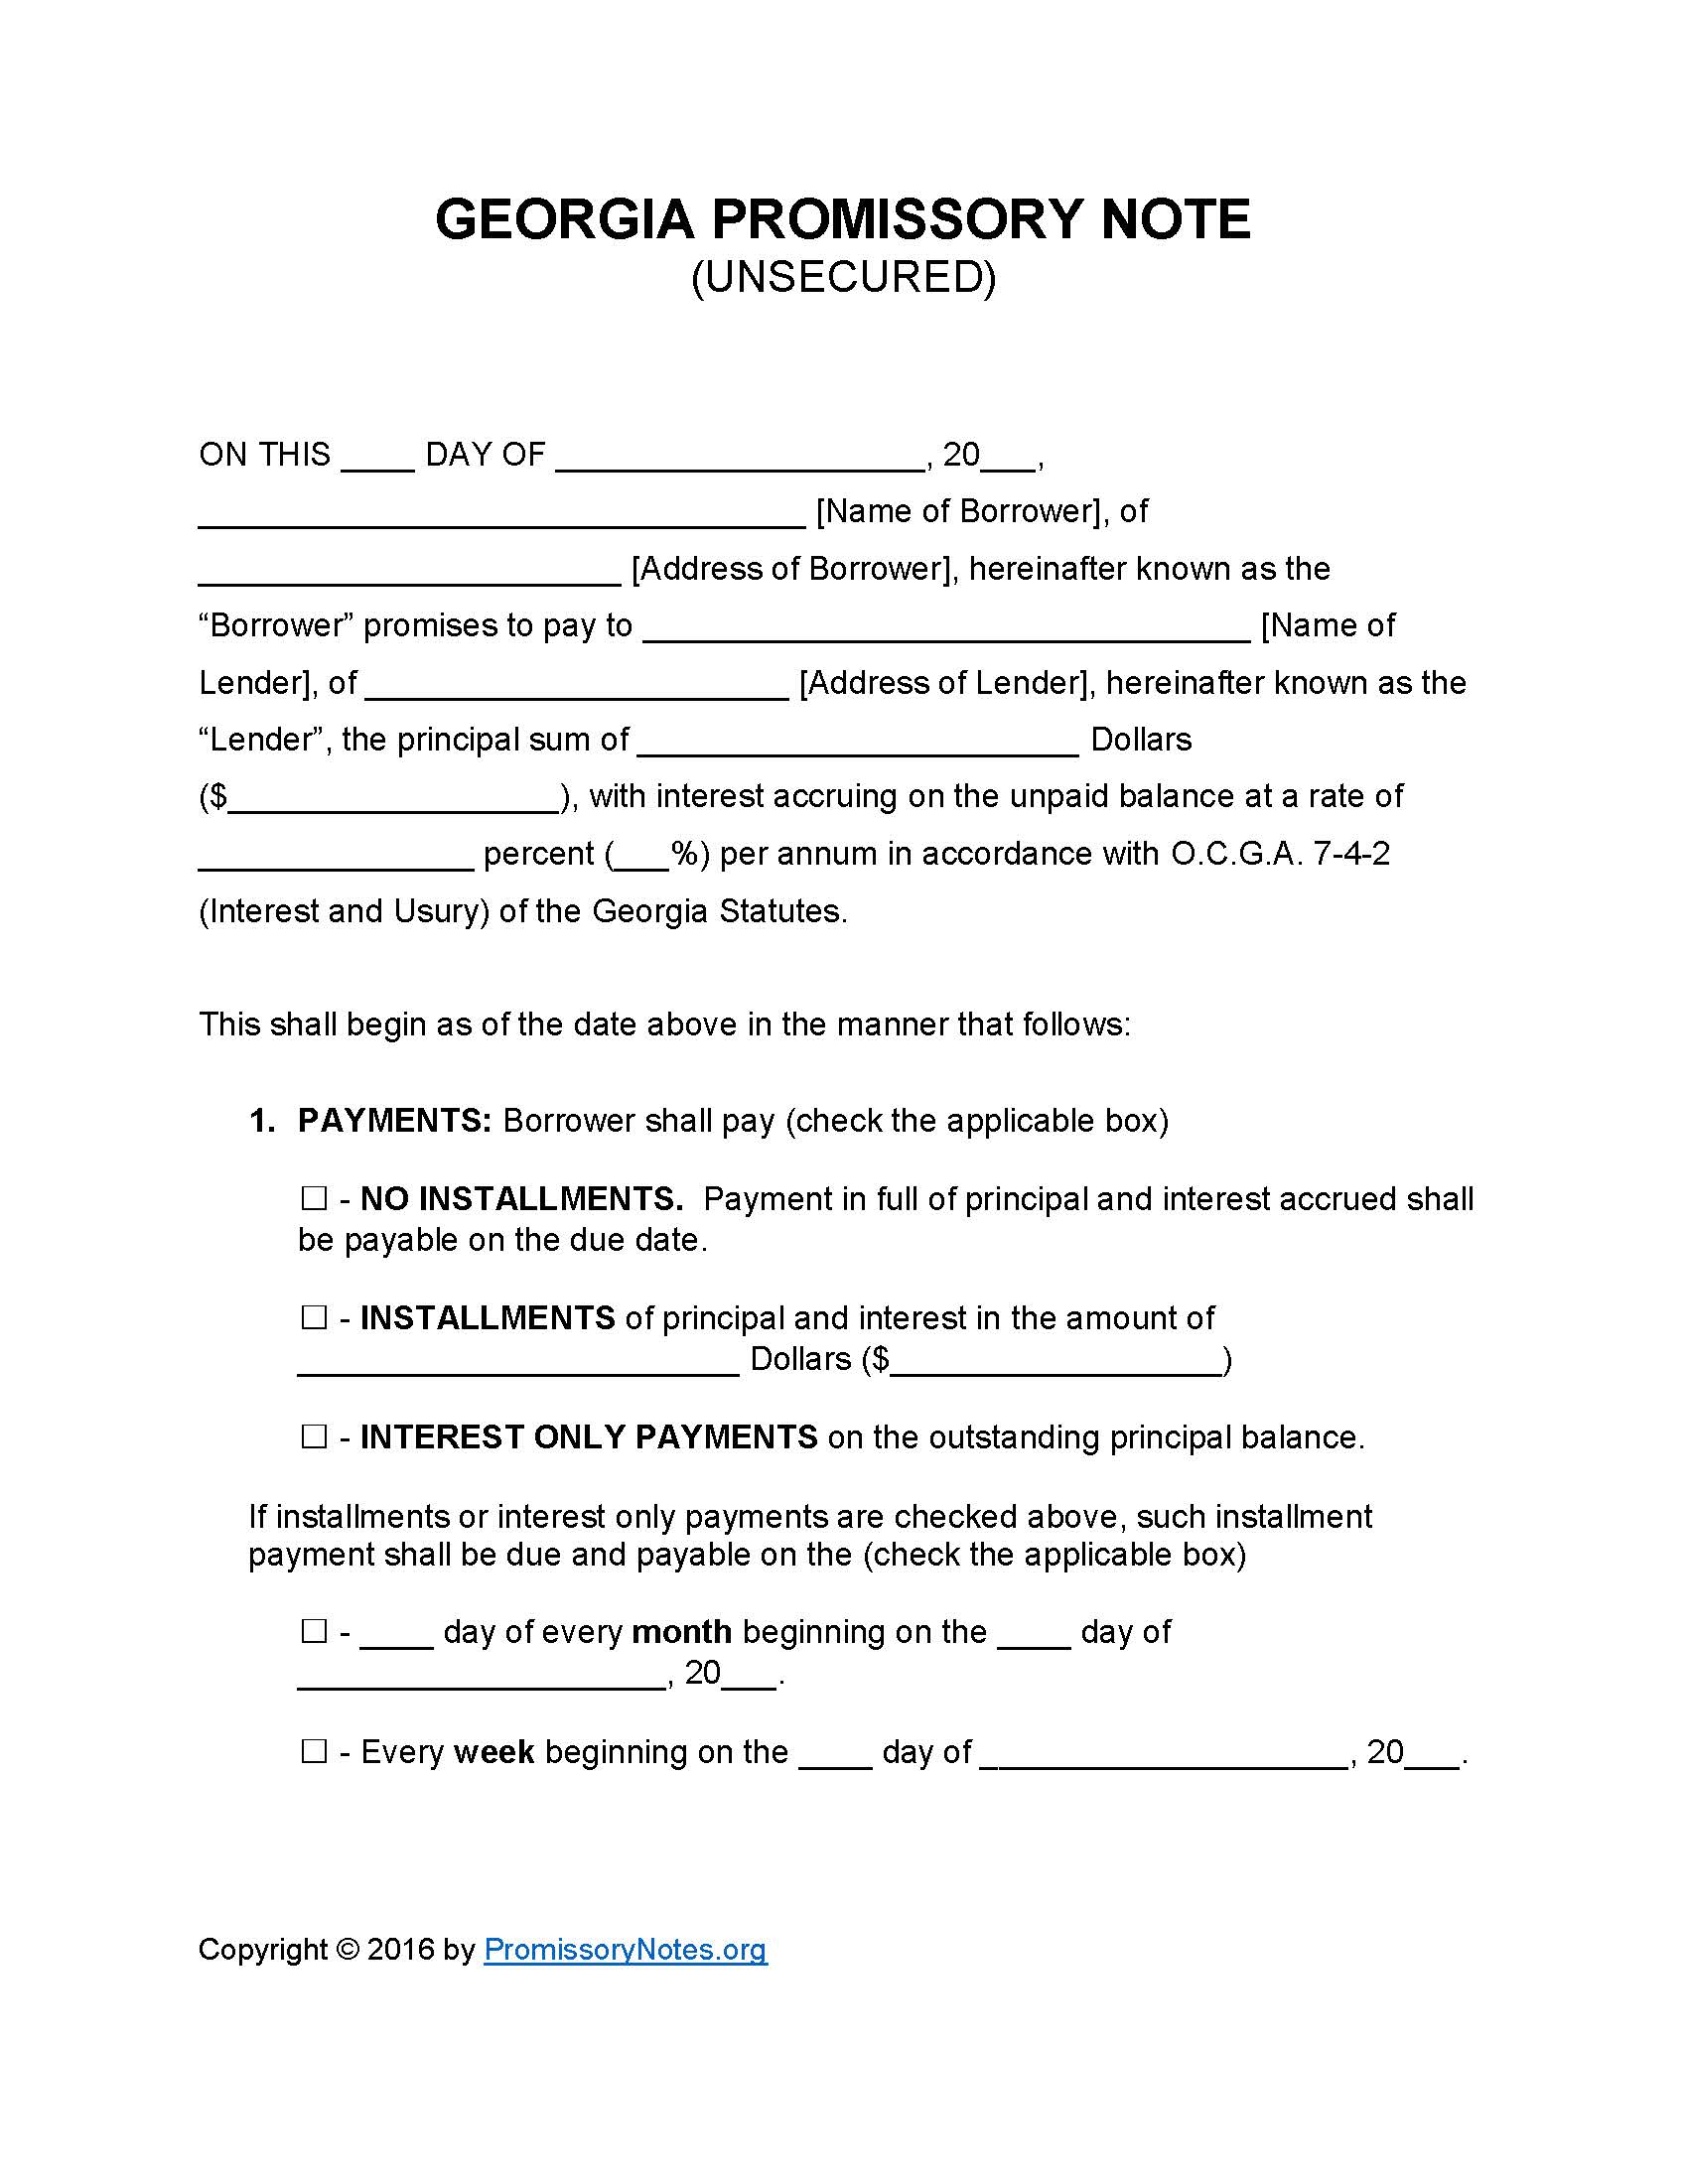 Georgia Unsecured Promissory Note Template Promissory Notes Promissory Notes